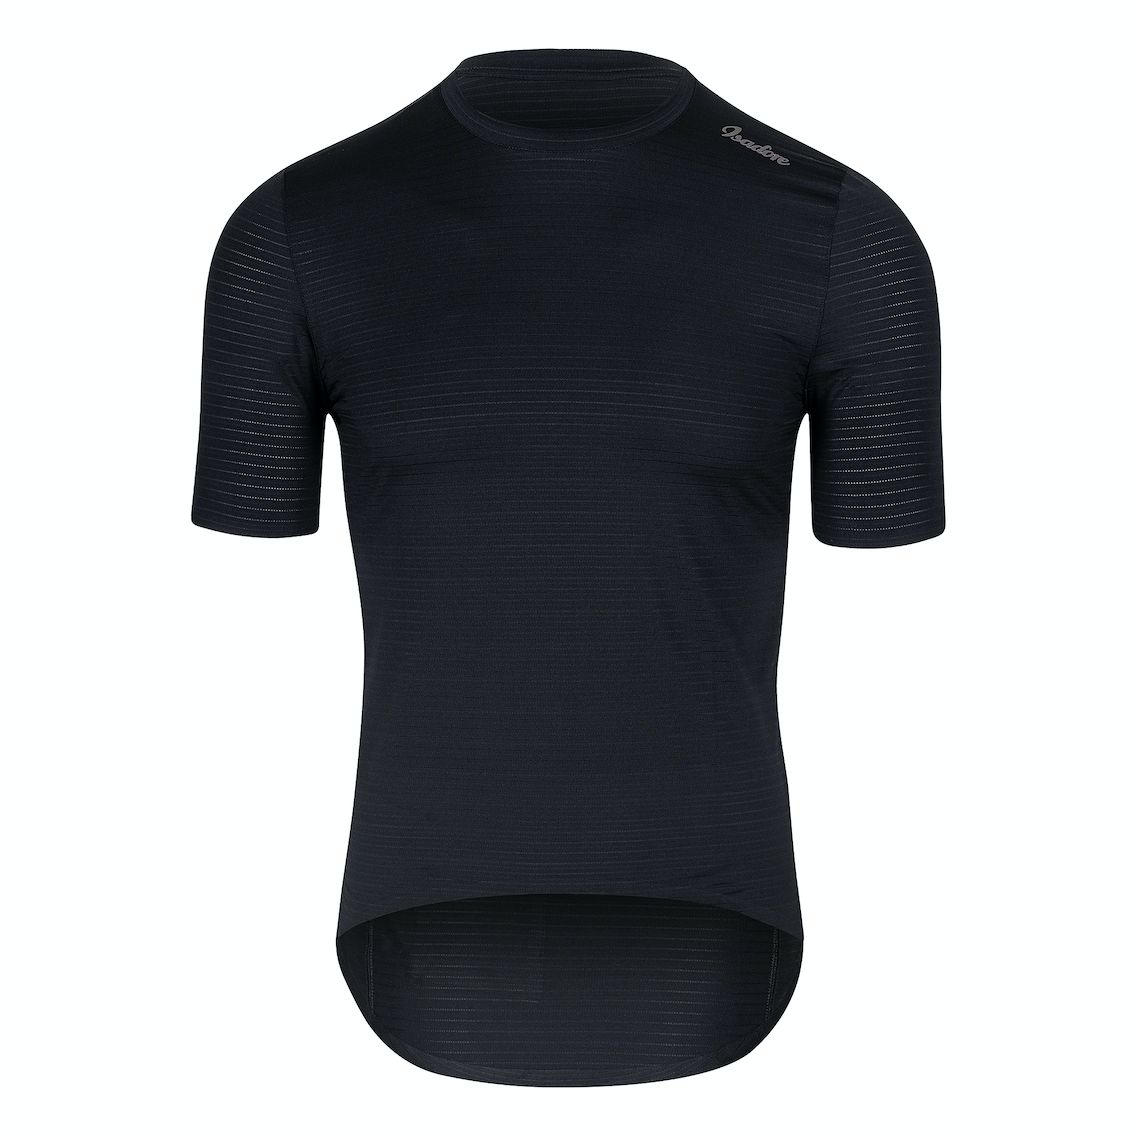 an Isadore indoor riding top in black